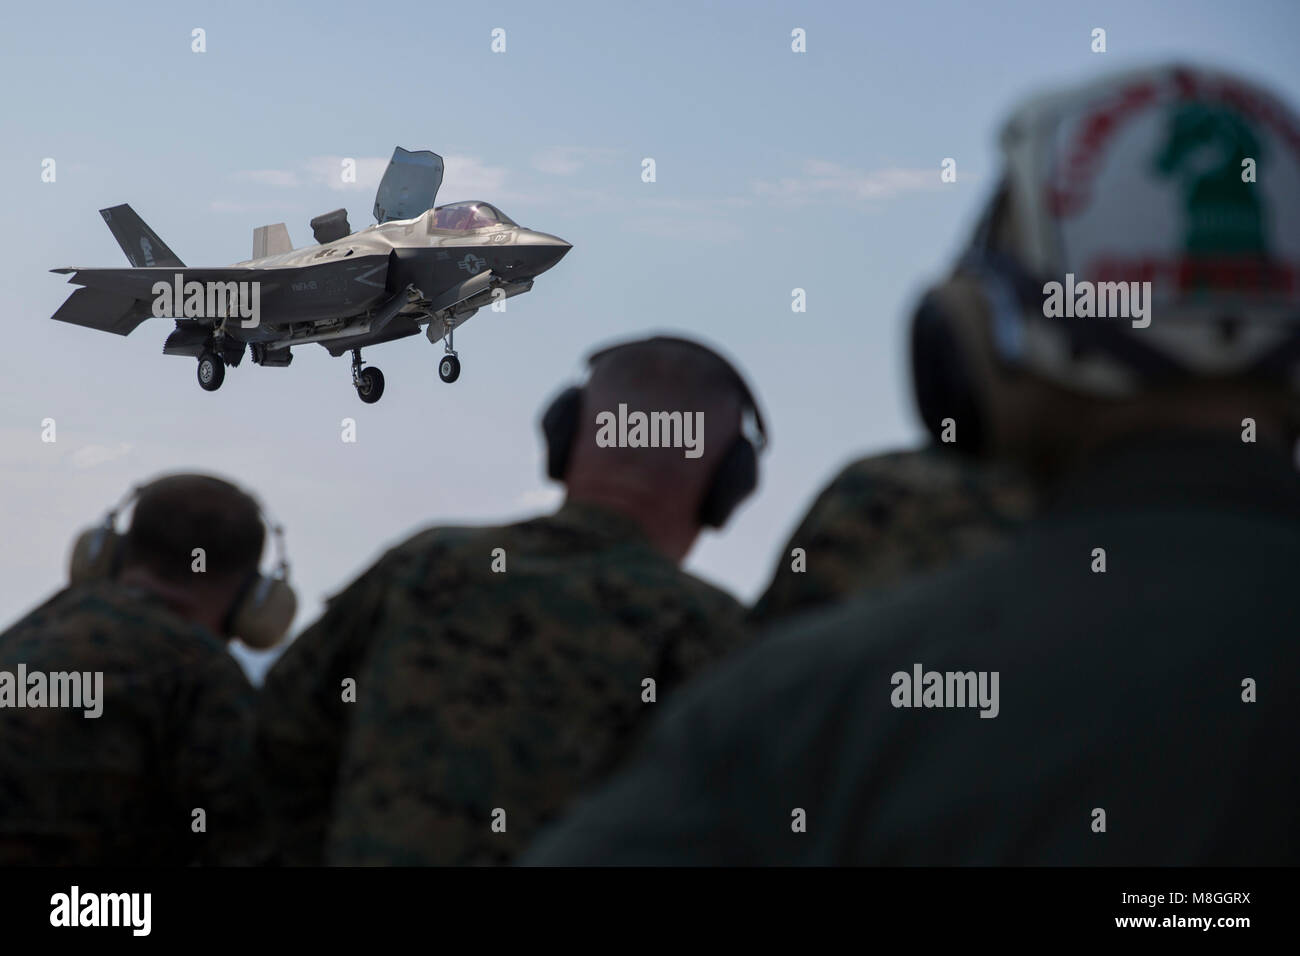 The III Marine Expeditionary Force Commanding General Lt. Gen. Lawrence D. Nicholson (center) observes an F-35B Lightning II during flight operations on the USS Wasp (LHD 1), March 12, 2018. The 31st Marine Expeditionary Unit is preparing for its regularly scheduled Spring Patrol 2018 in support of stability and security in the Indo-Pacific region. As the Marine Corps' only continuously forward-deployed MEU, the 31st MEU provides a flexible force ready to perform a wide range of military operations. (U.S. Marine Corps photo by Cpl. Bernadette Wildes) Stock Photo